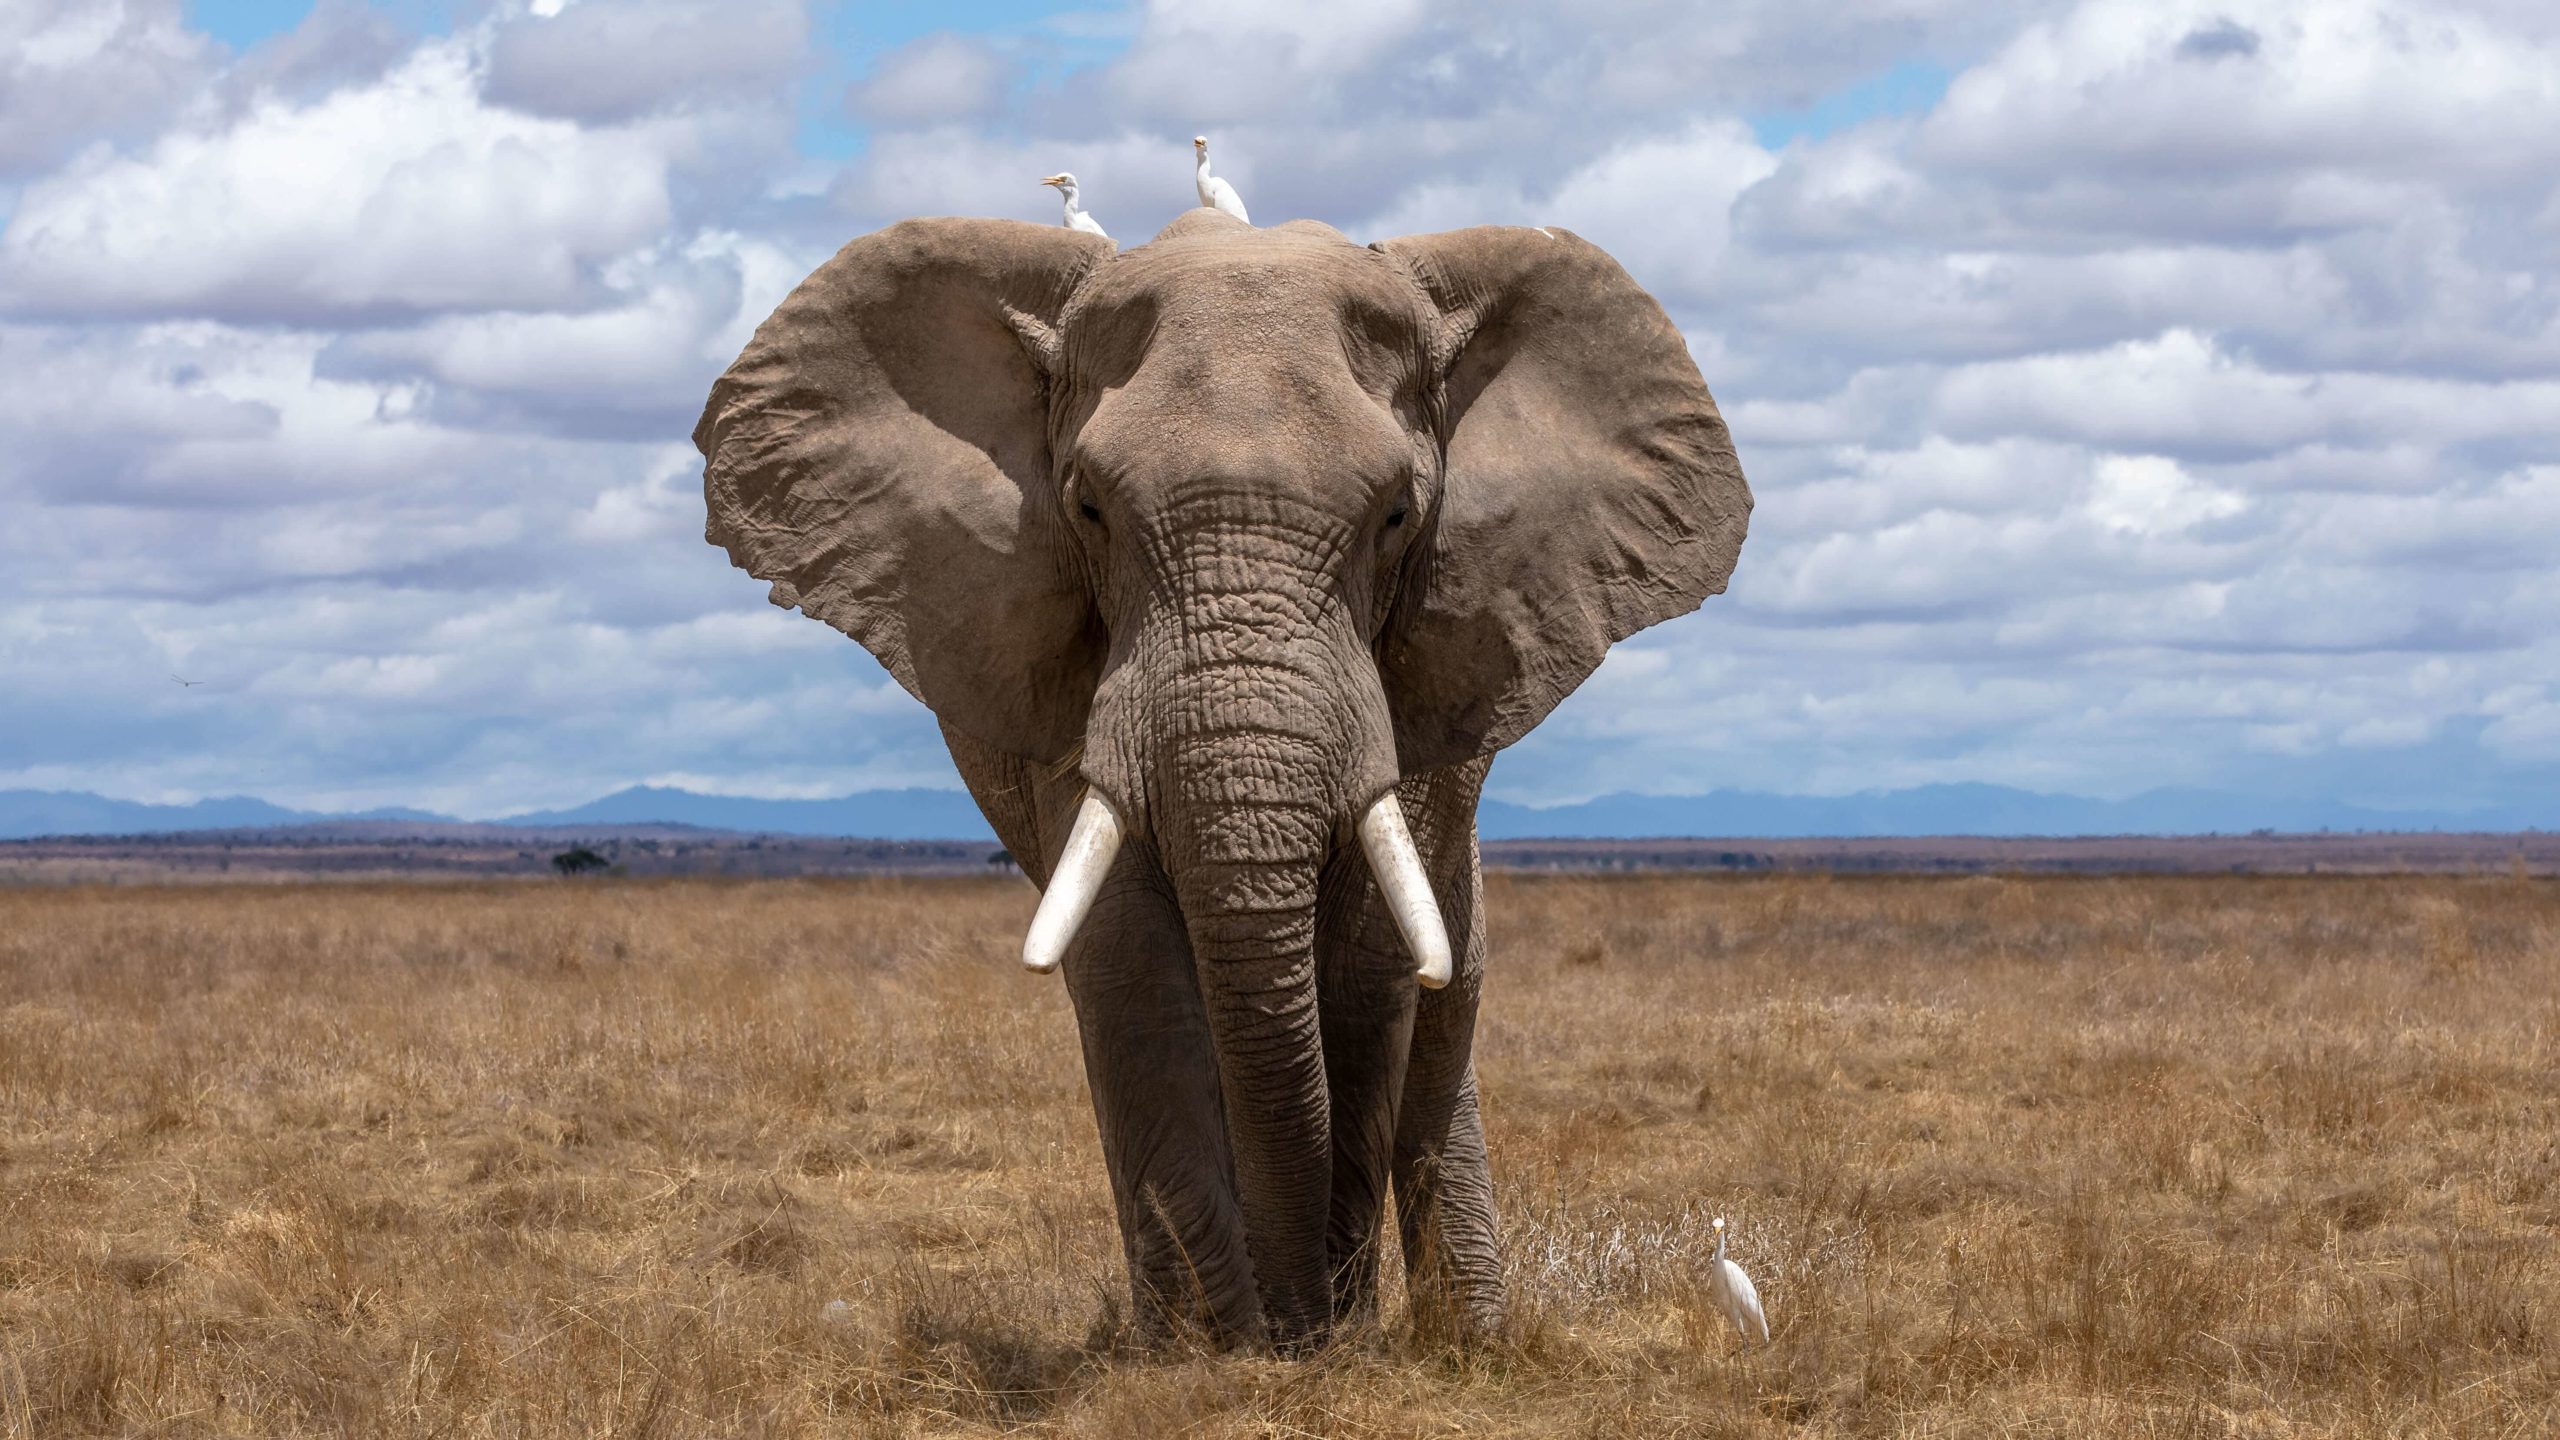 A picture of an elephant, which is an animal that starts with an E.